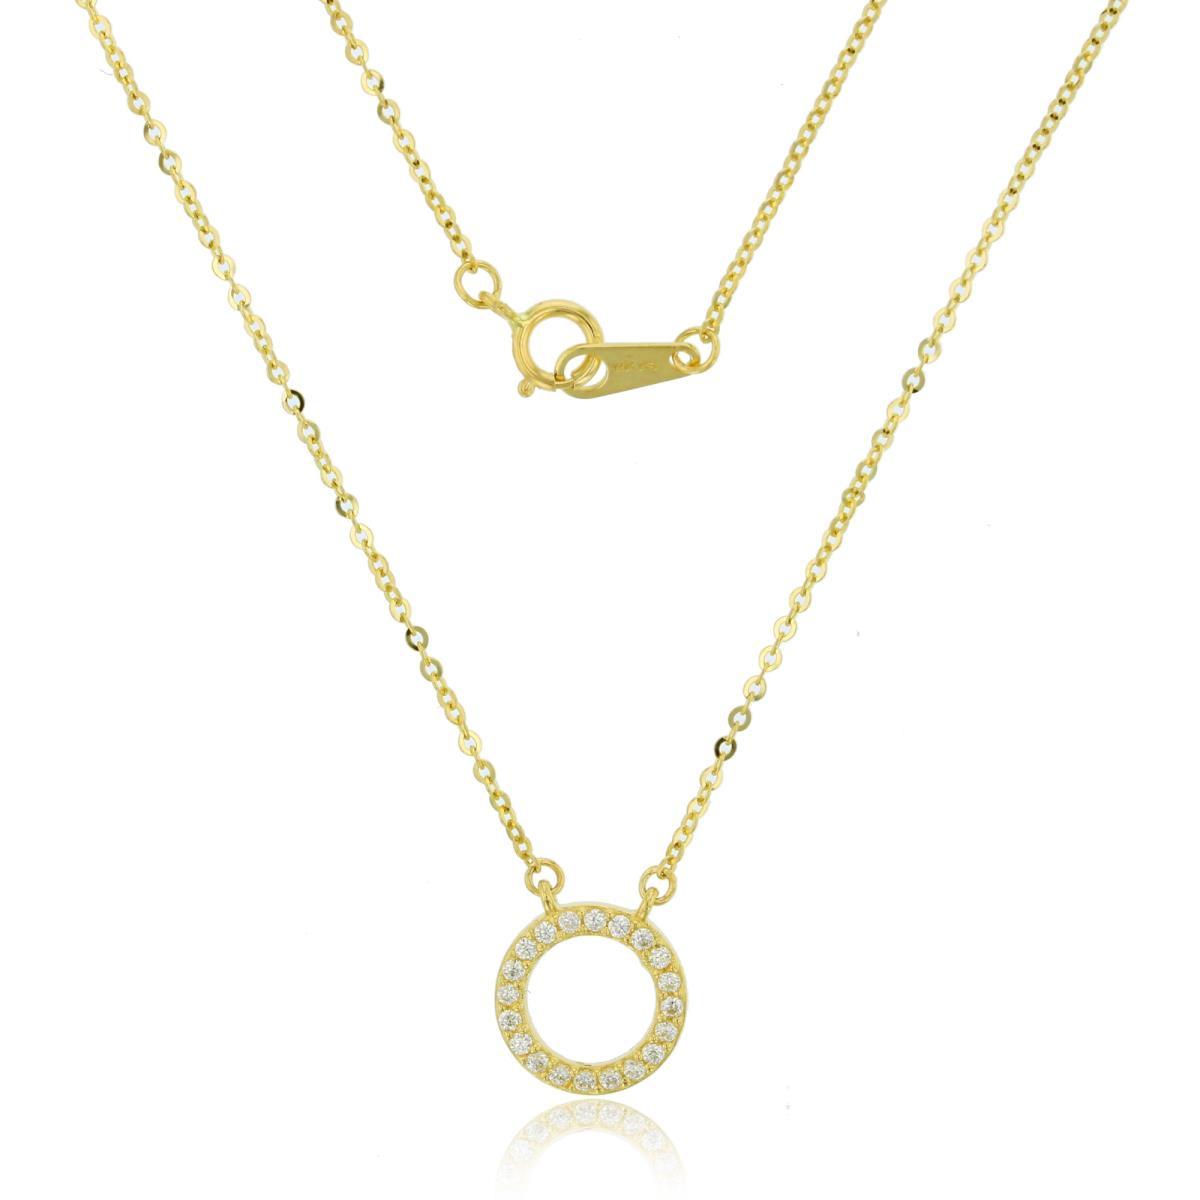 14K Yellow Gold Micropave Open Circle 16" Necklace